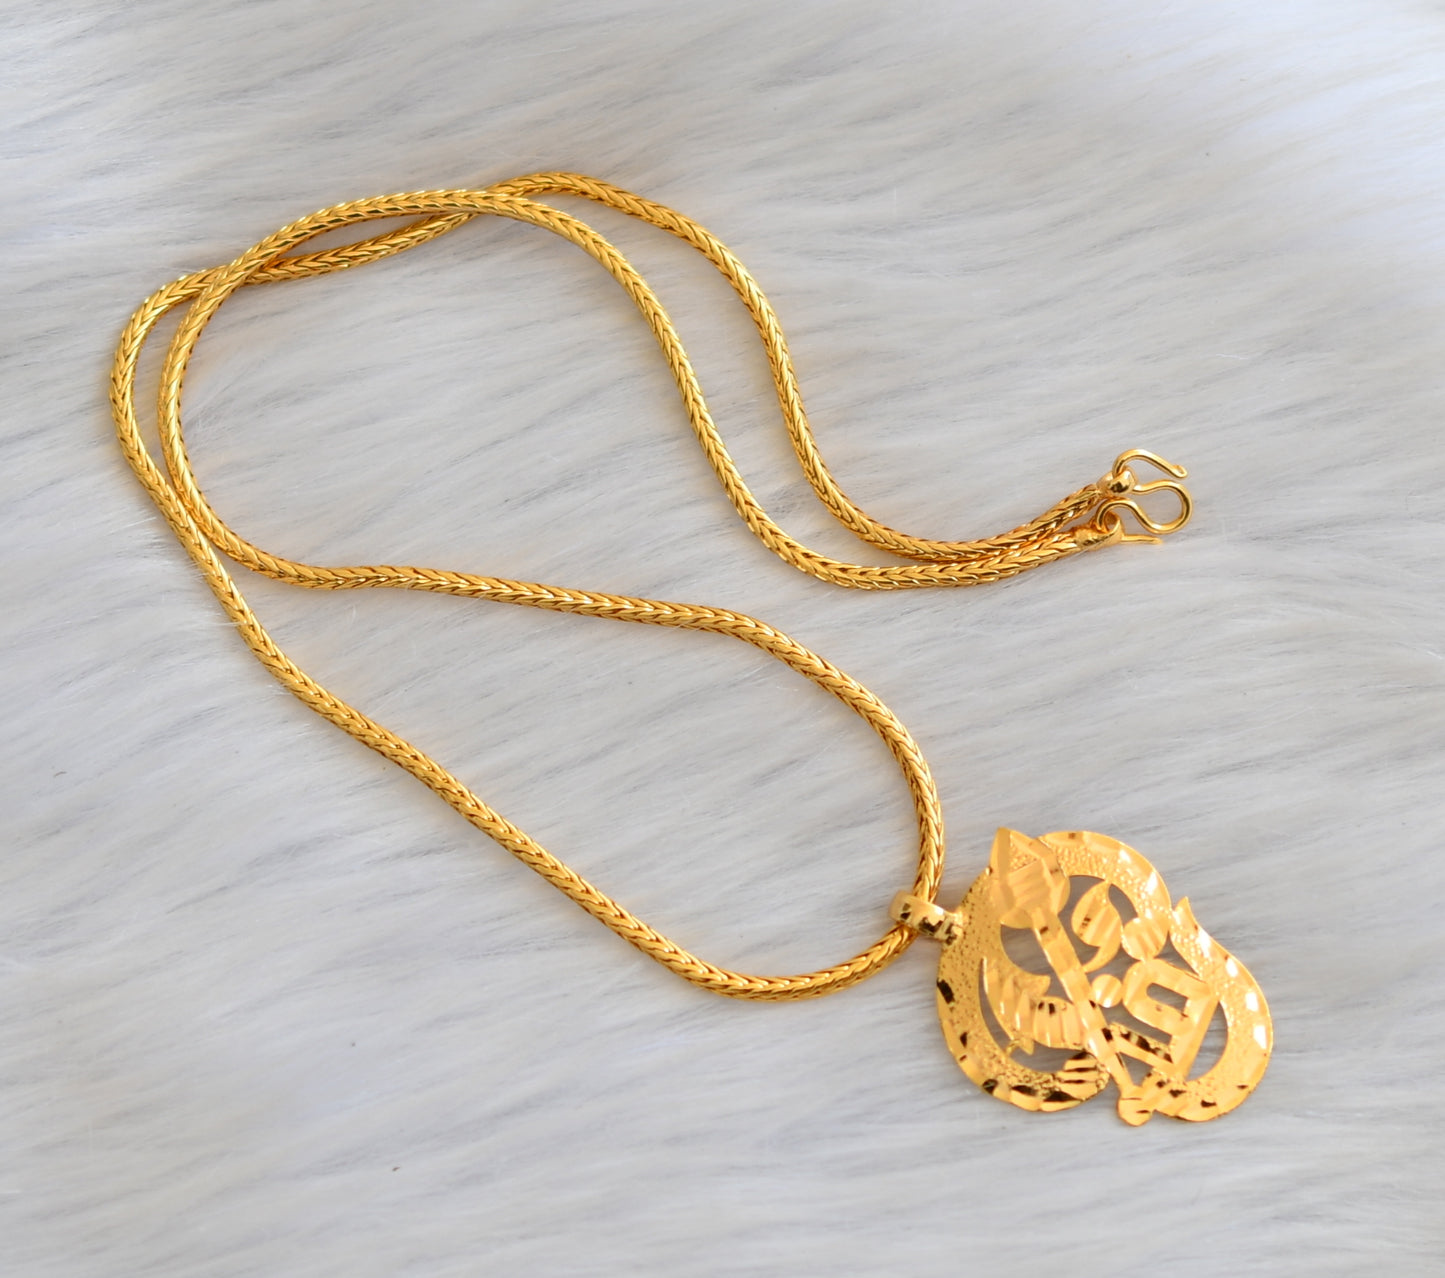 Gold tone 'Tamil om' Pendant with 18 inches chain dj-40774